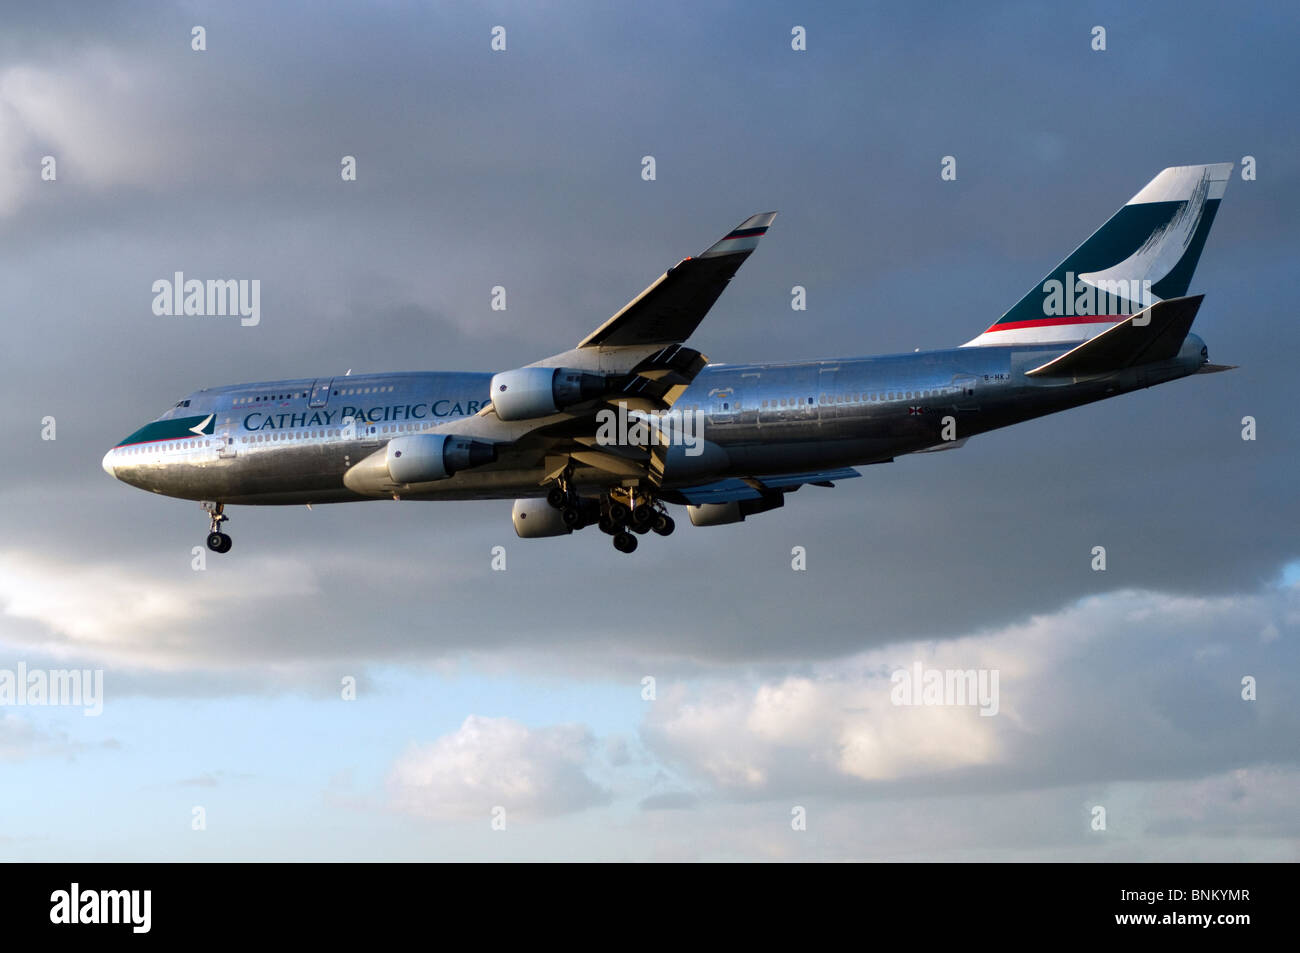 Boeing 747 operated by Cathay Pacific Cargo on approach for landing at London Heathrow Airport, UK. Stock Photo